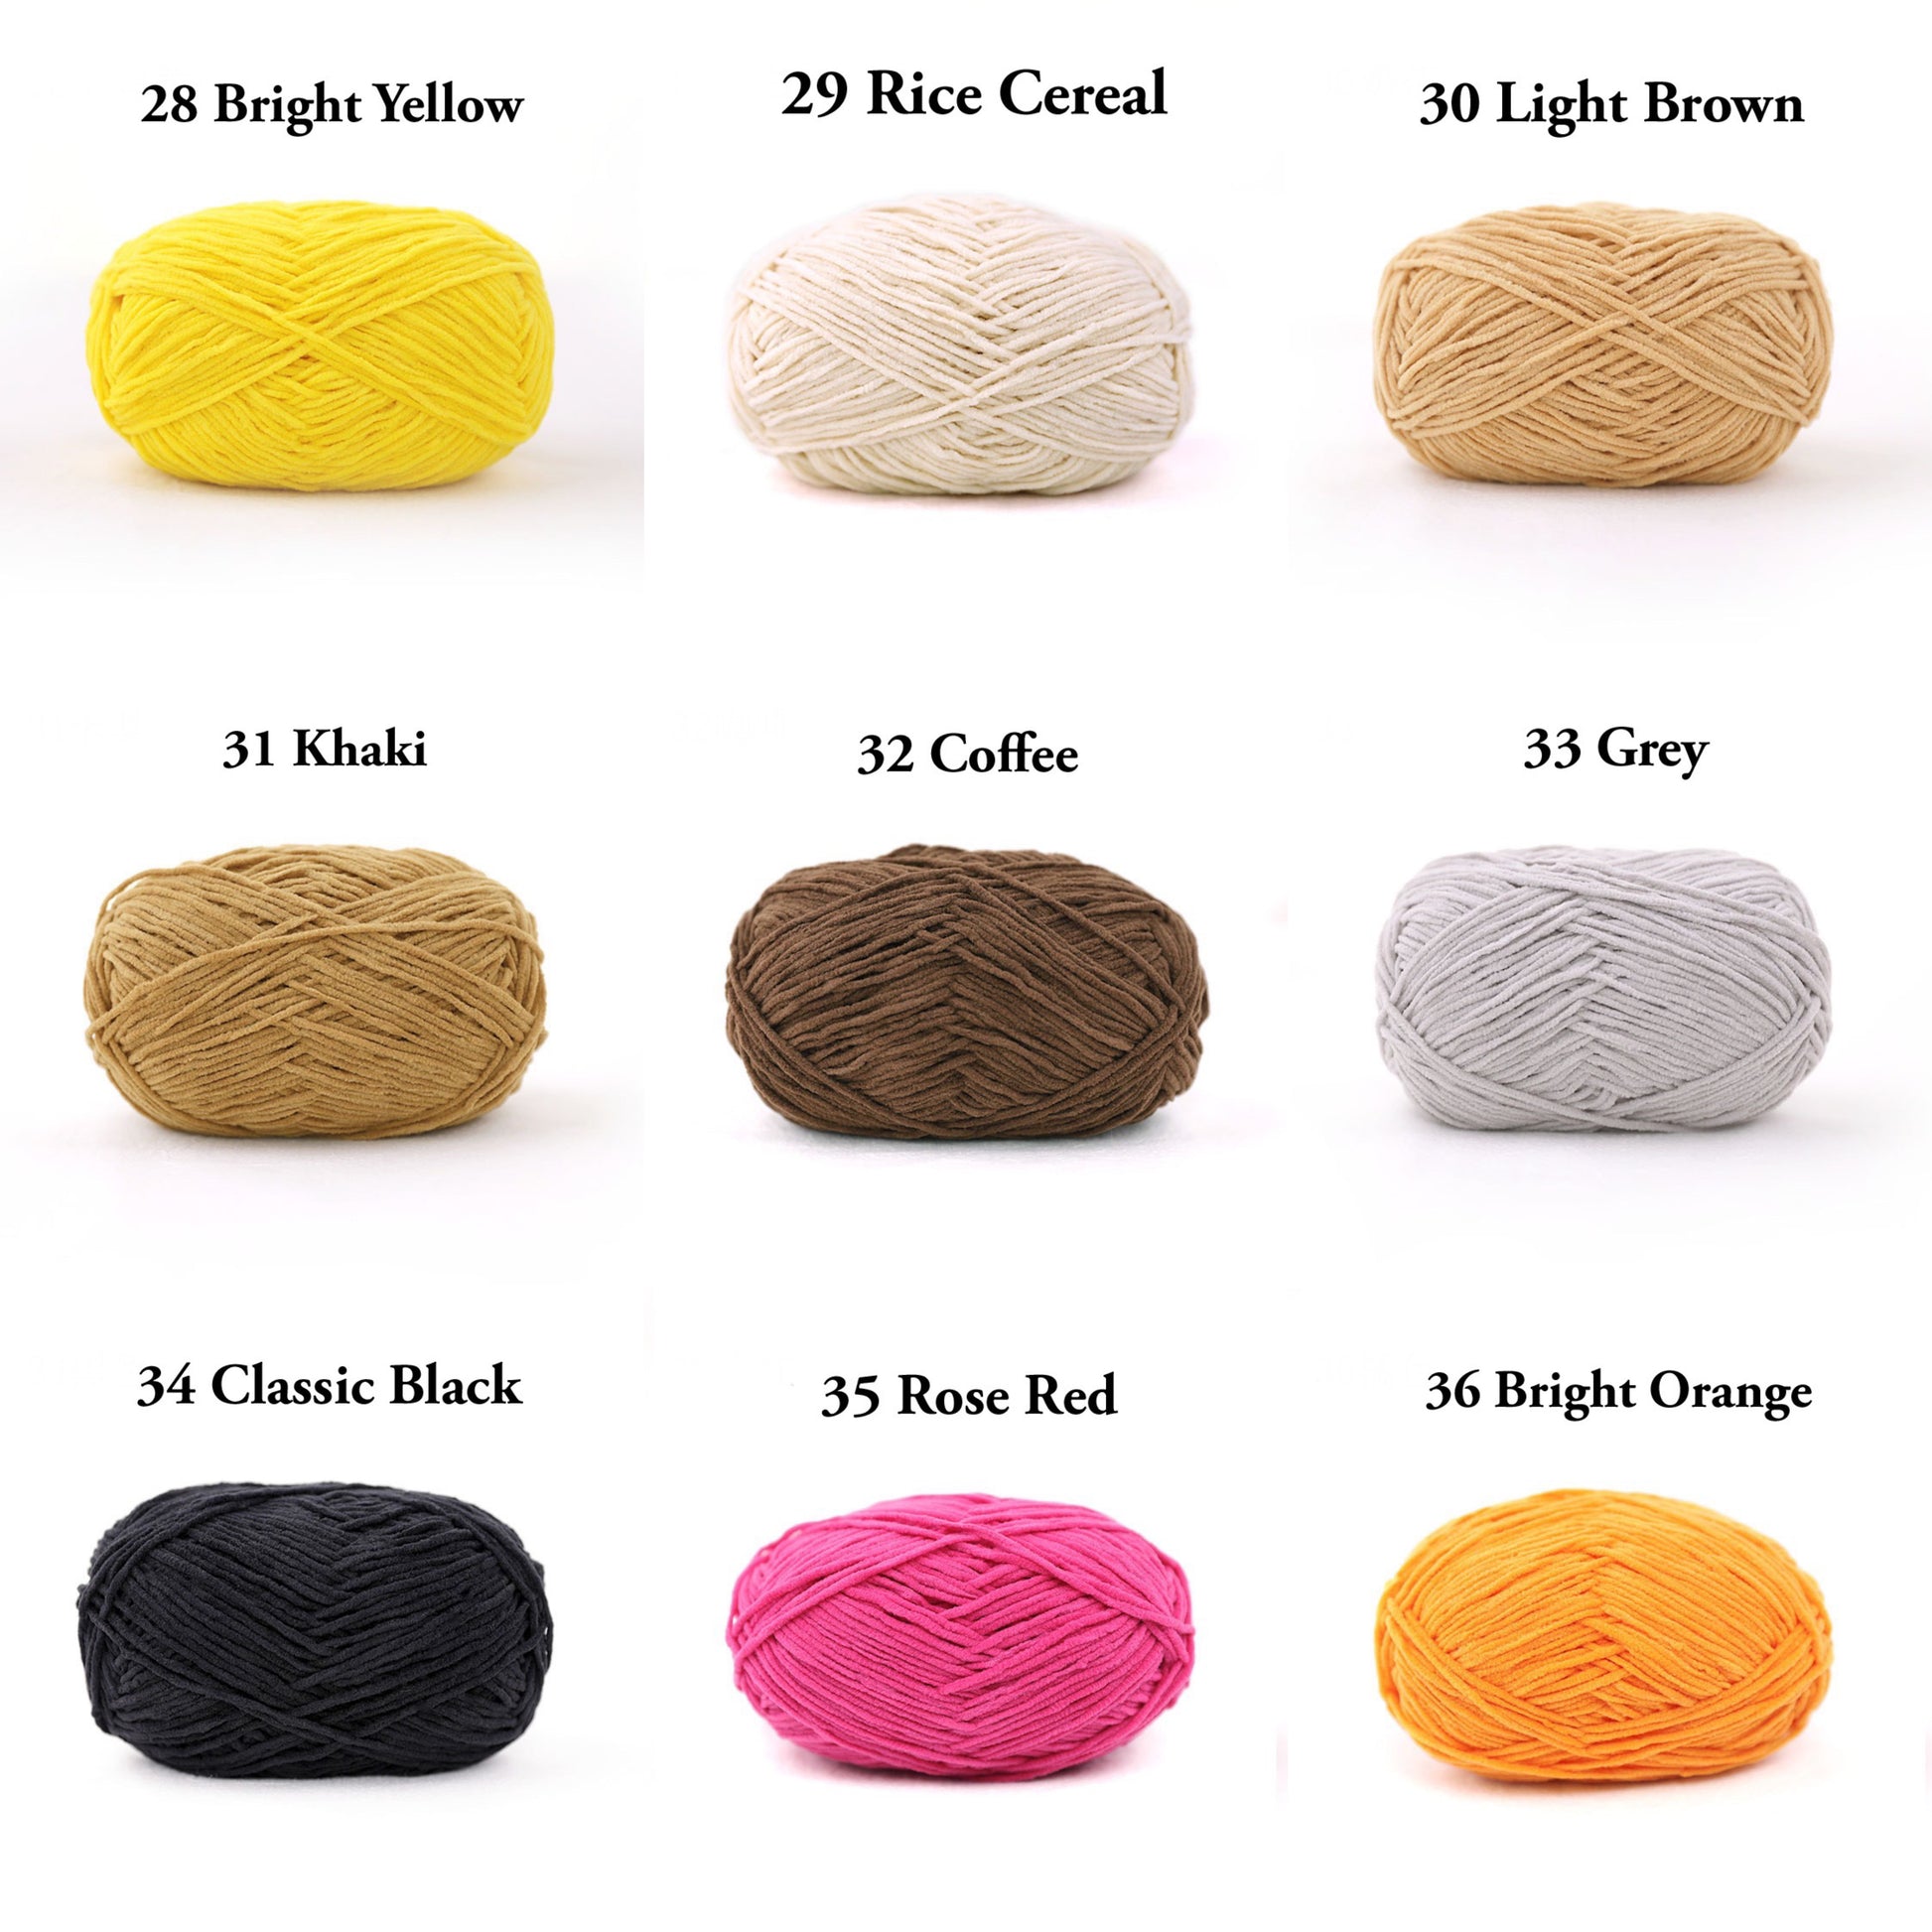  PESUMA Soft Skin-Friendly Crochet Yarn – Level Cotton Wool for  Knitting DIY Children Clothes, Thick Yarn for Crocheting Blankets, Baby  Yarn, and More(Pink)